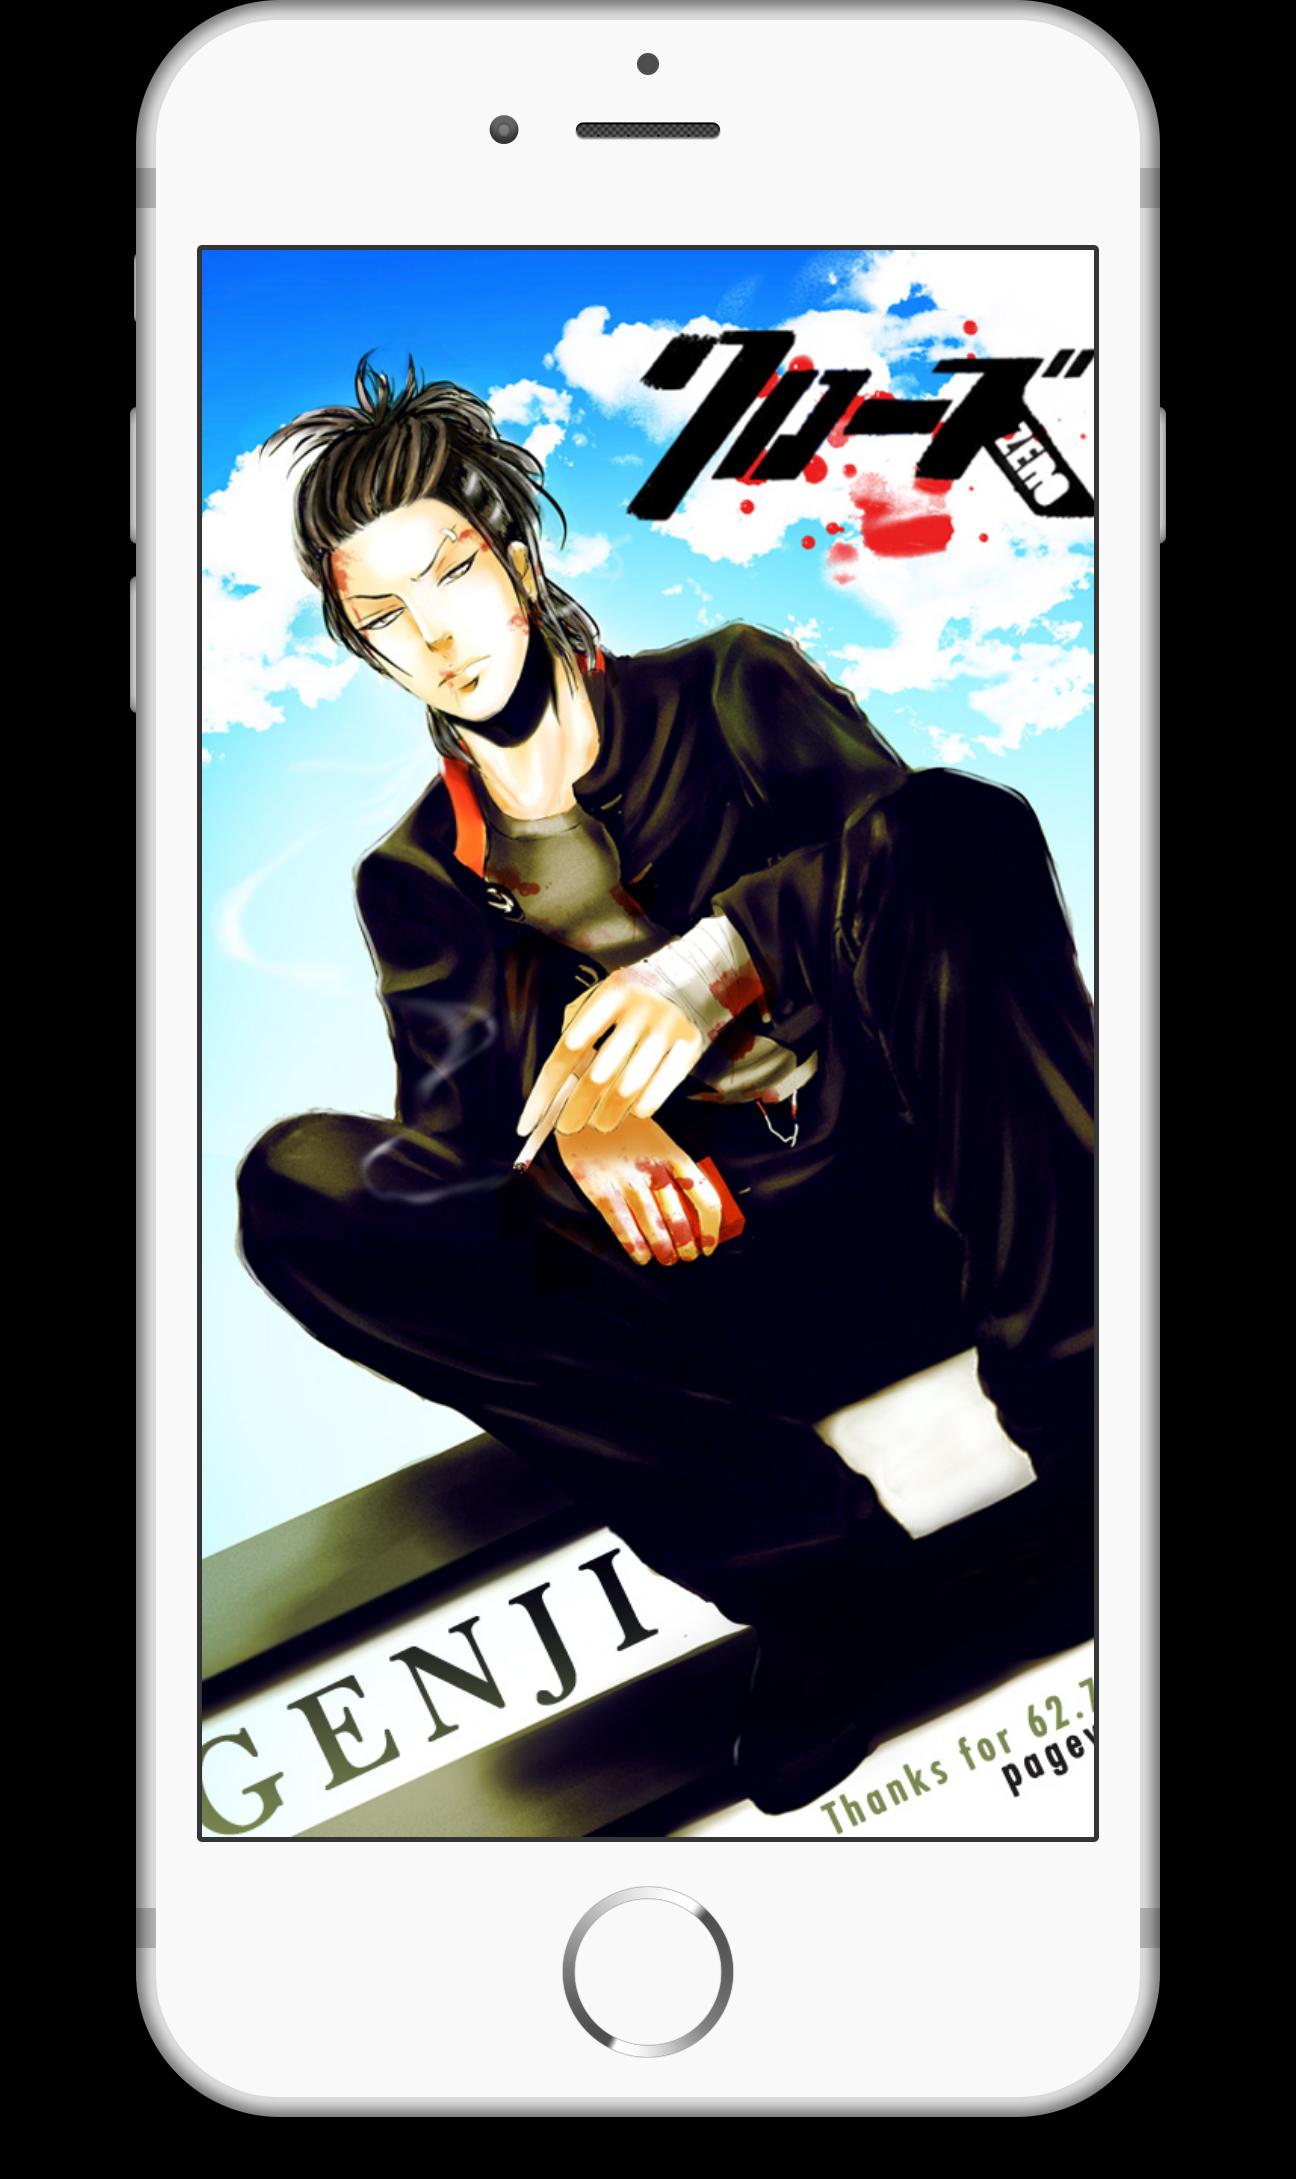 Crows Zero Live Wallpapers 4k Hd Dlya Android Skachat Apk